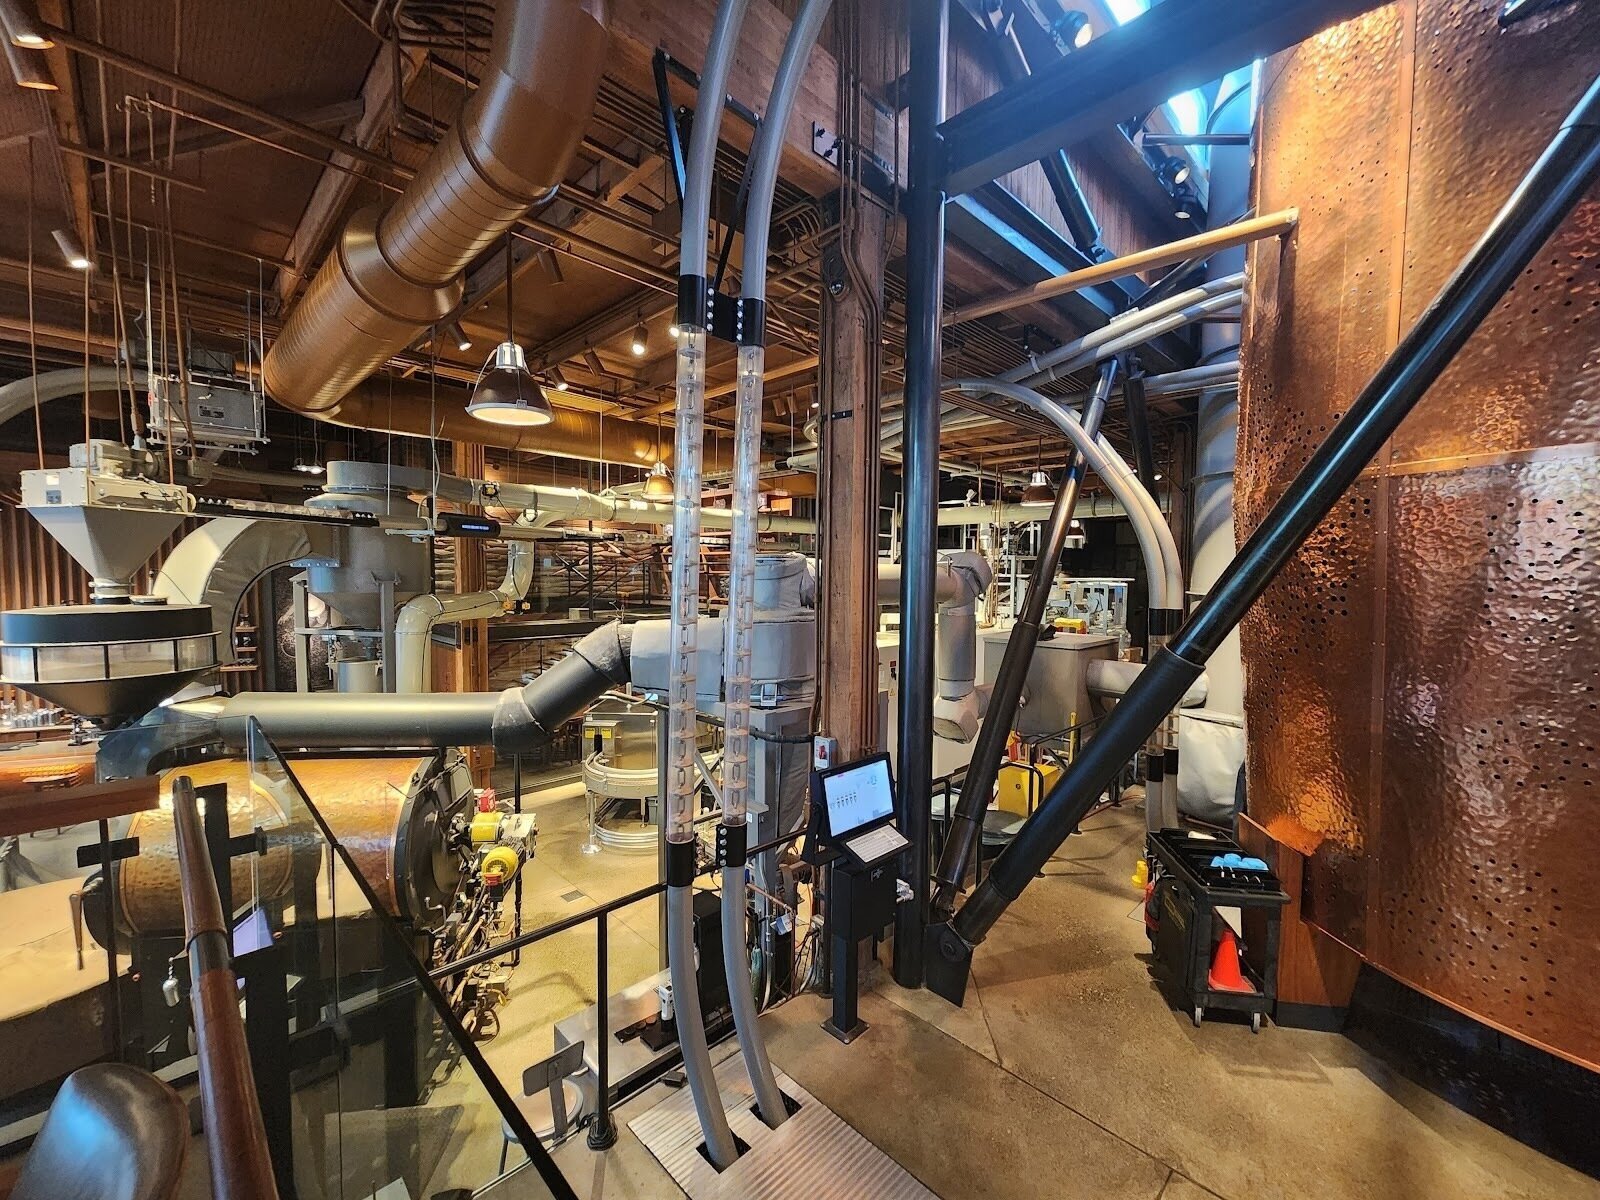 <span class="translation_missing" title="translation missing: en.meta.location_title, location_name: Starbucks Reserve Roastery, city: Seattle">Location Title</span>